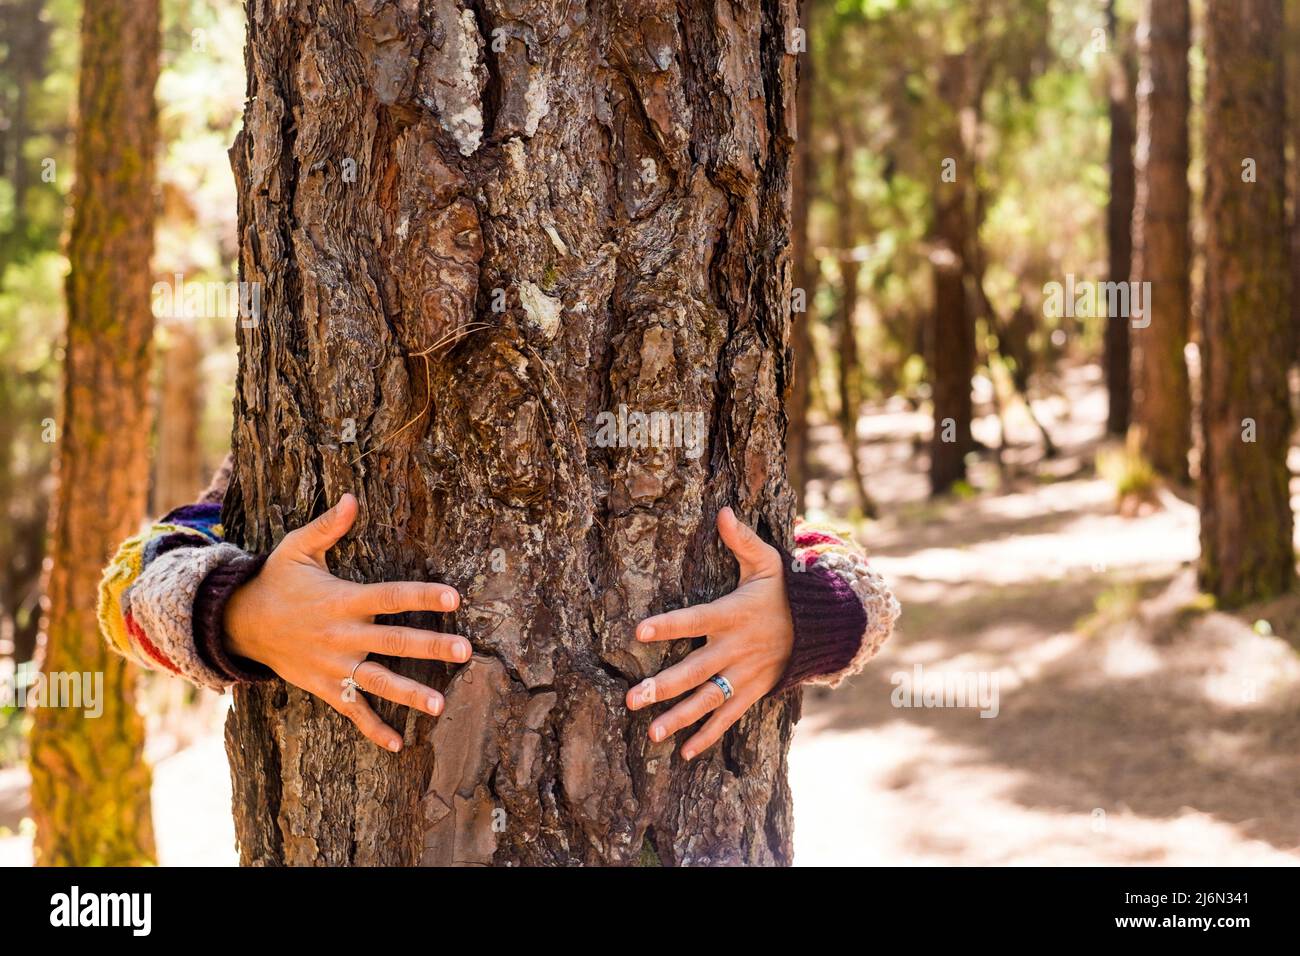 Save world earth and safe forest from deforestation - care environemtn woods with people hugging a tree in outdoor leisure lifestyle - love nature Stock Photo